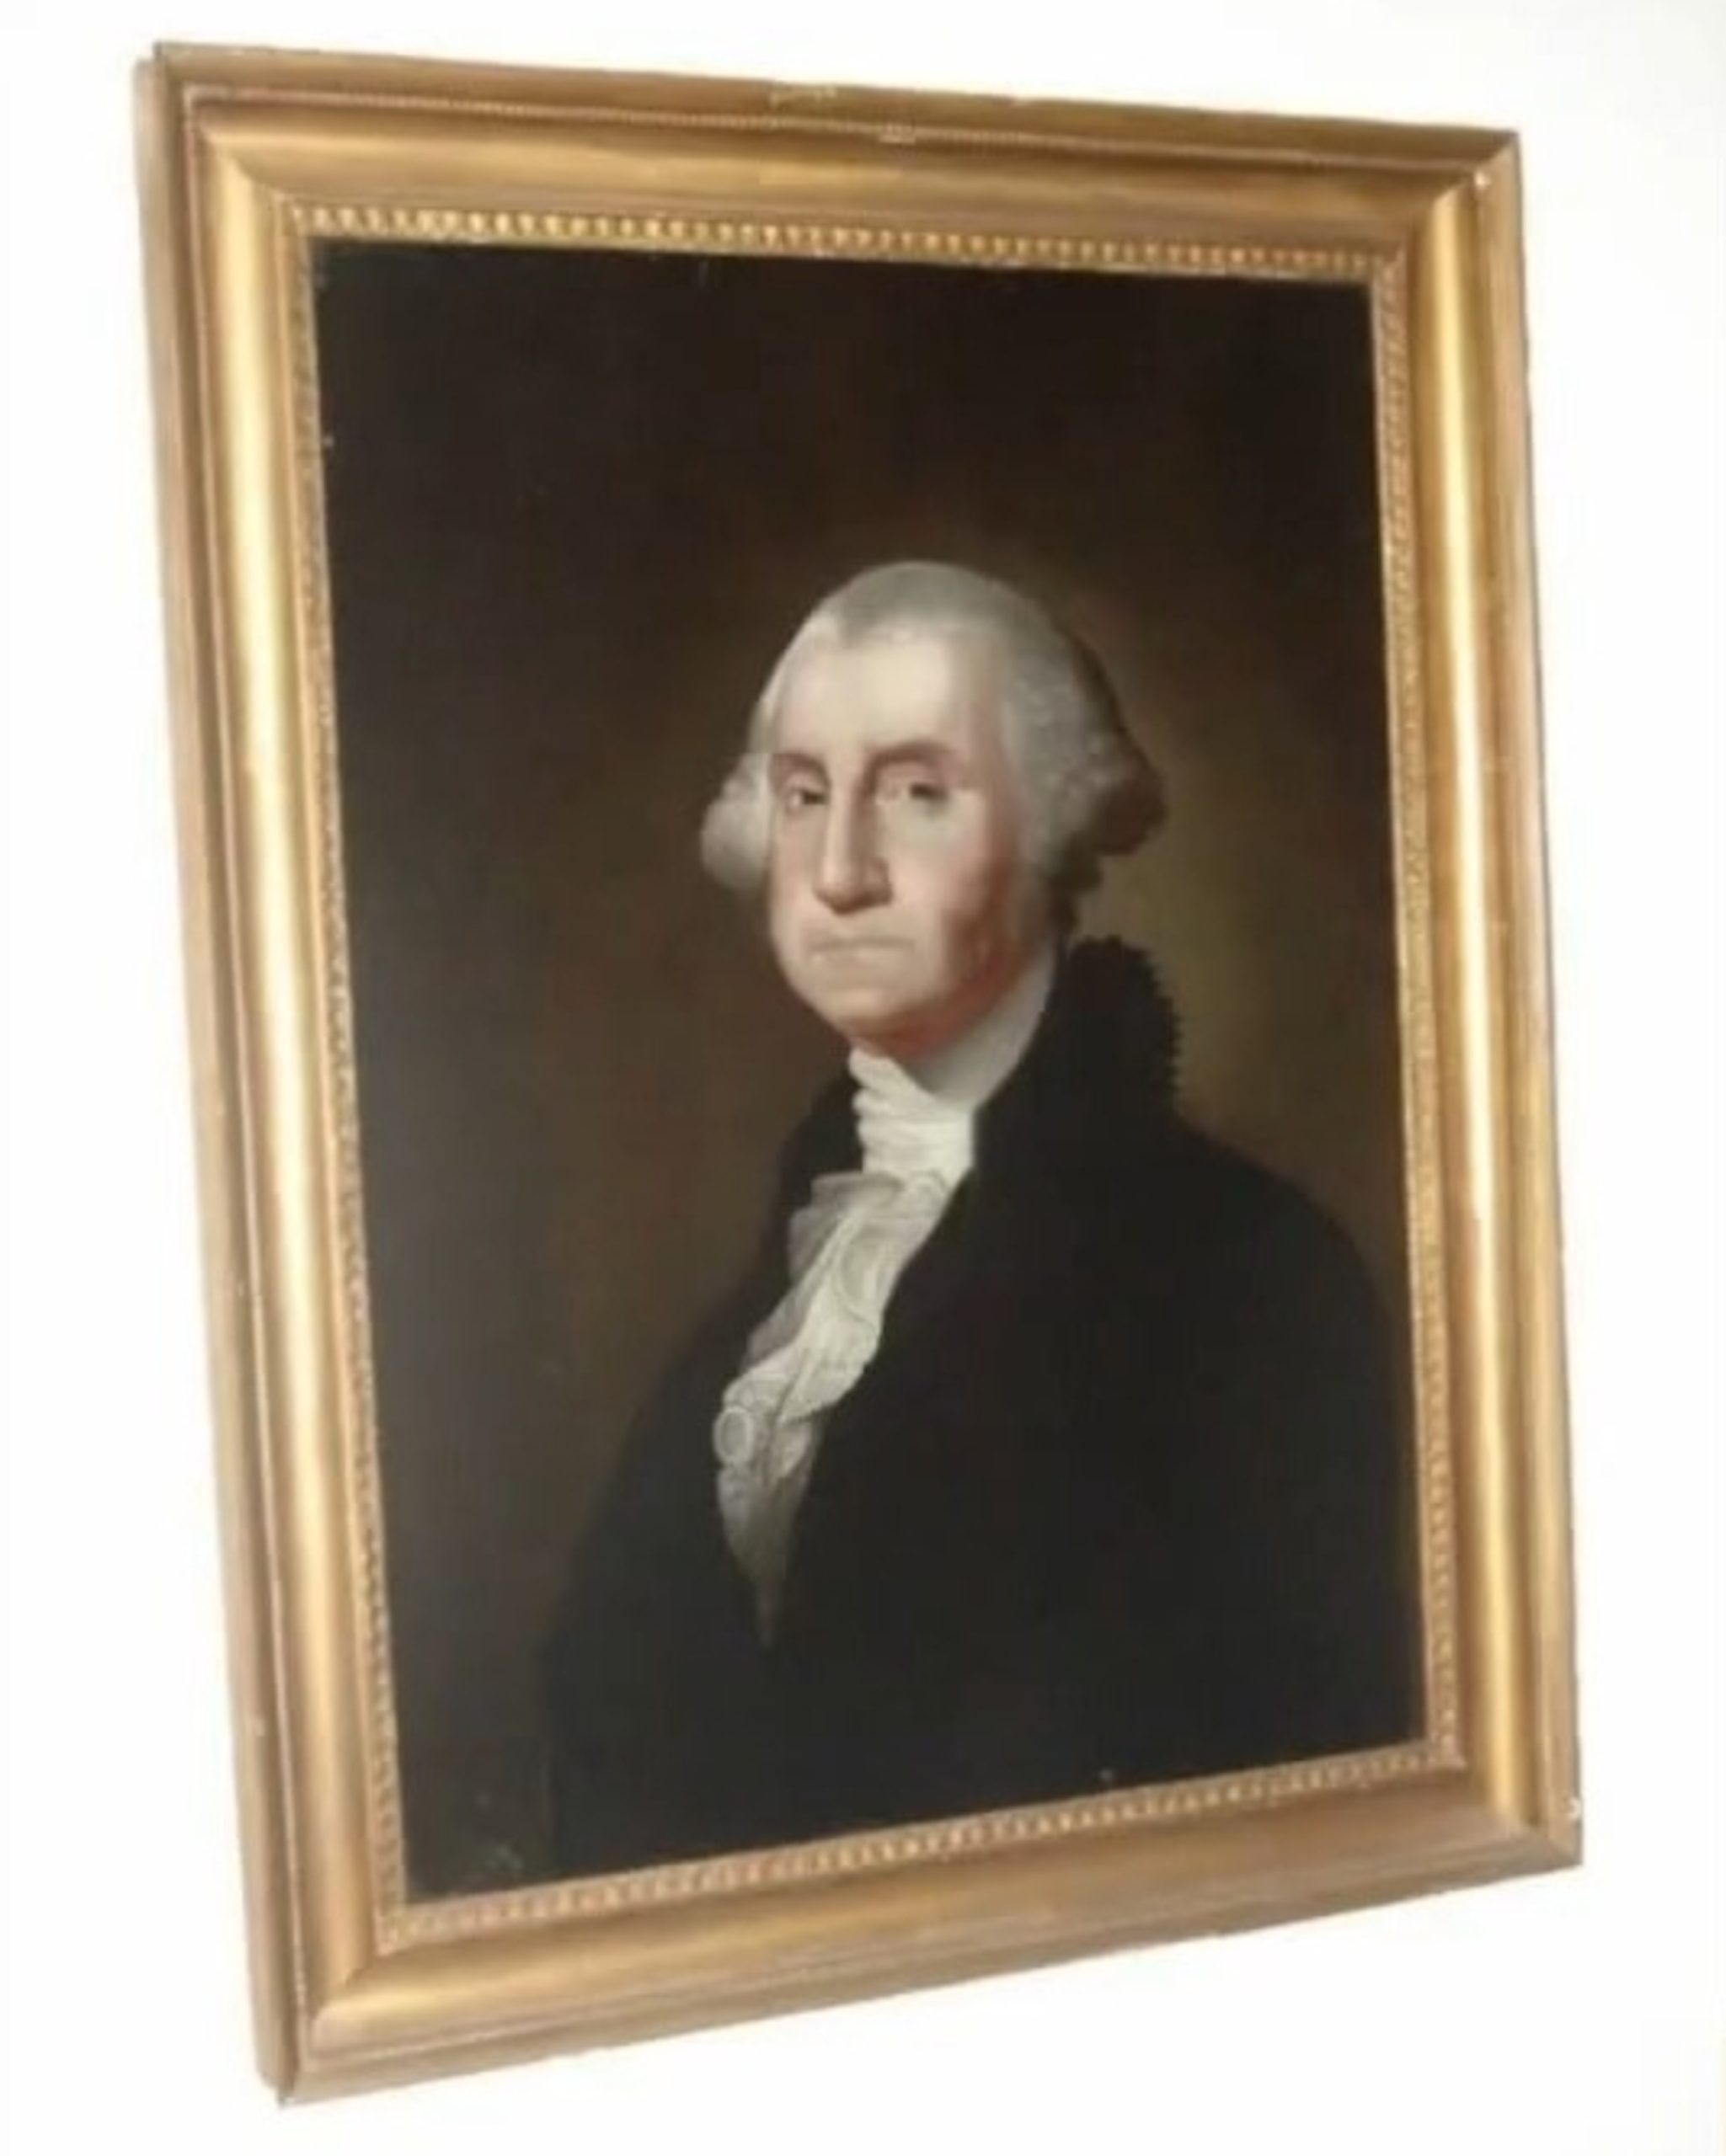 Police on the lookout for stolen 200-year-old portrait of George Washington, considered a 'national treasure'